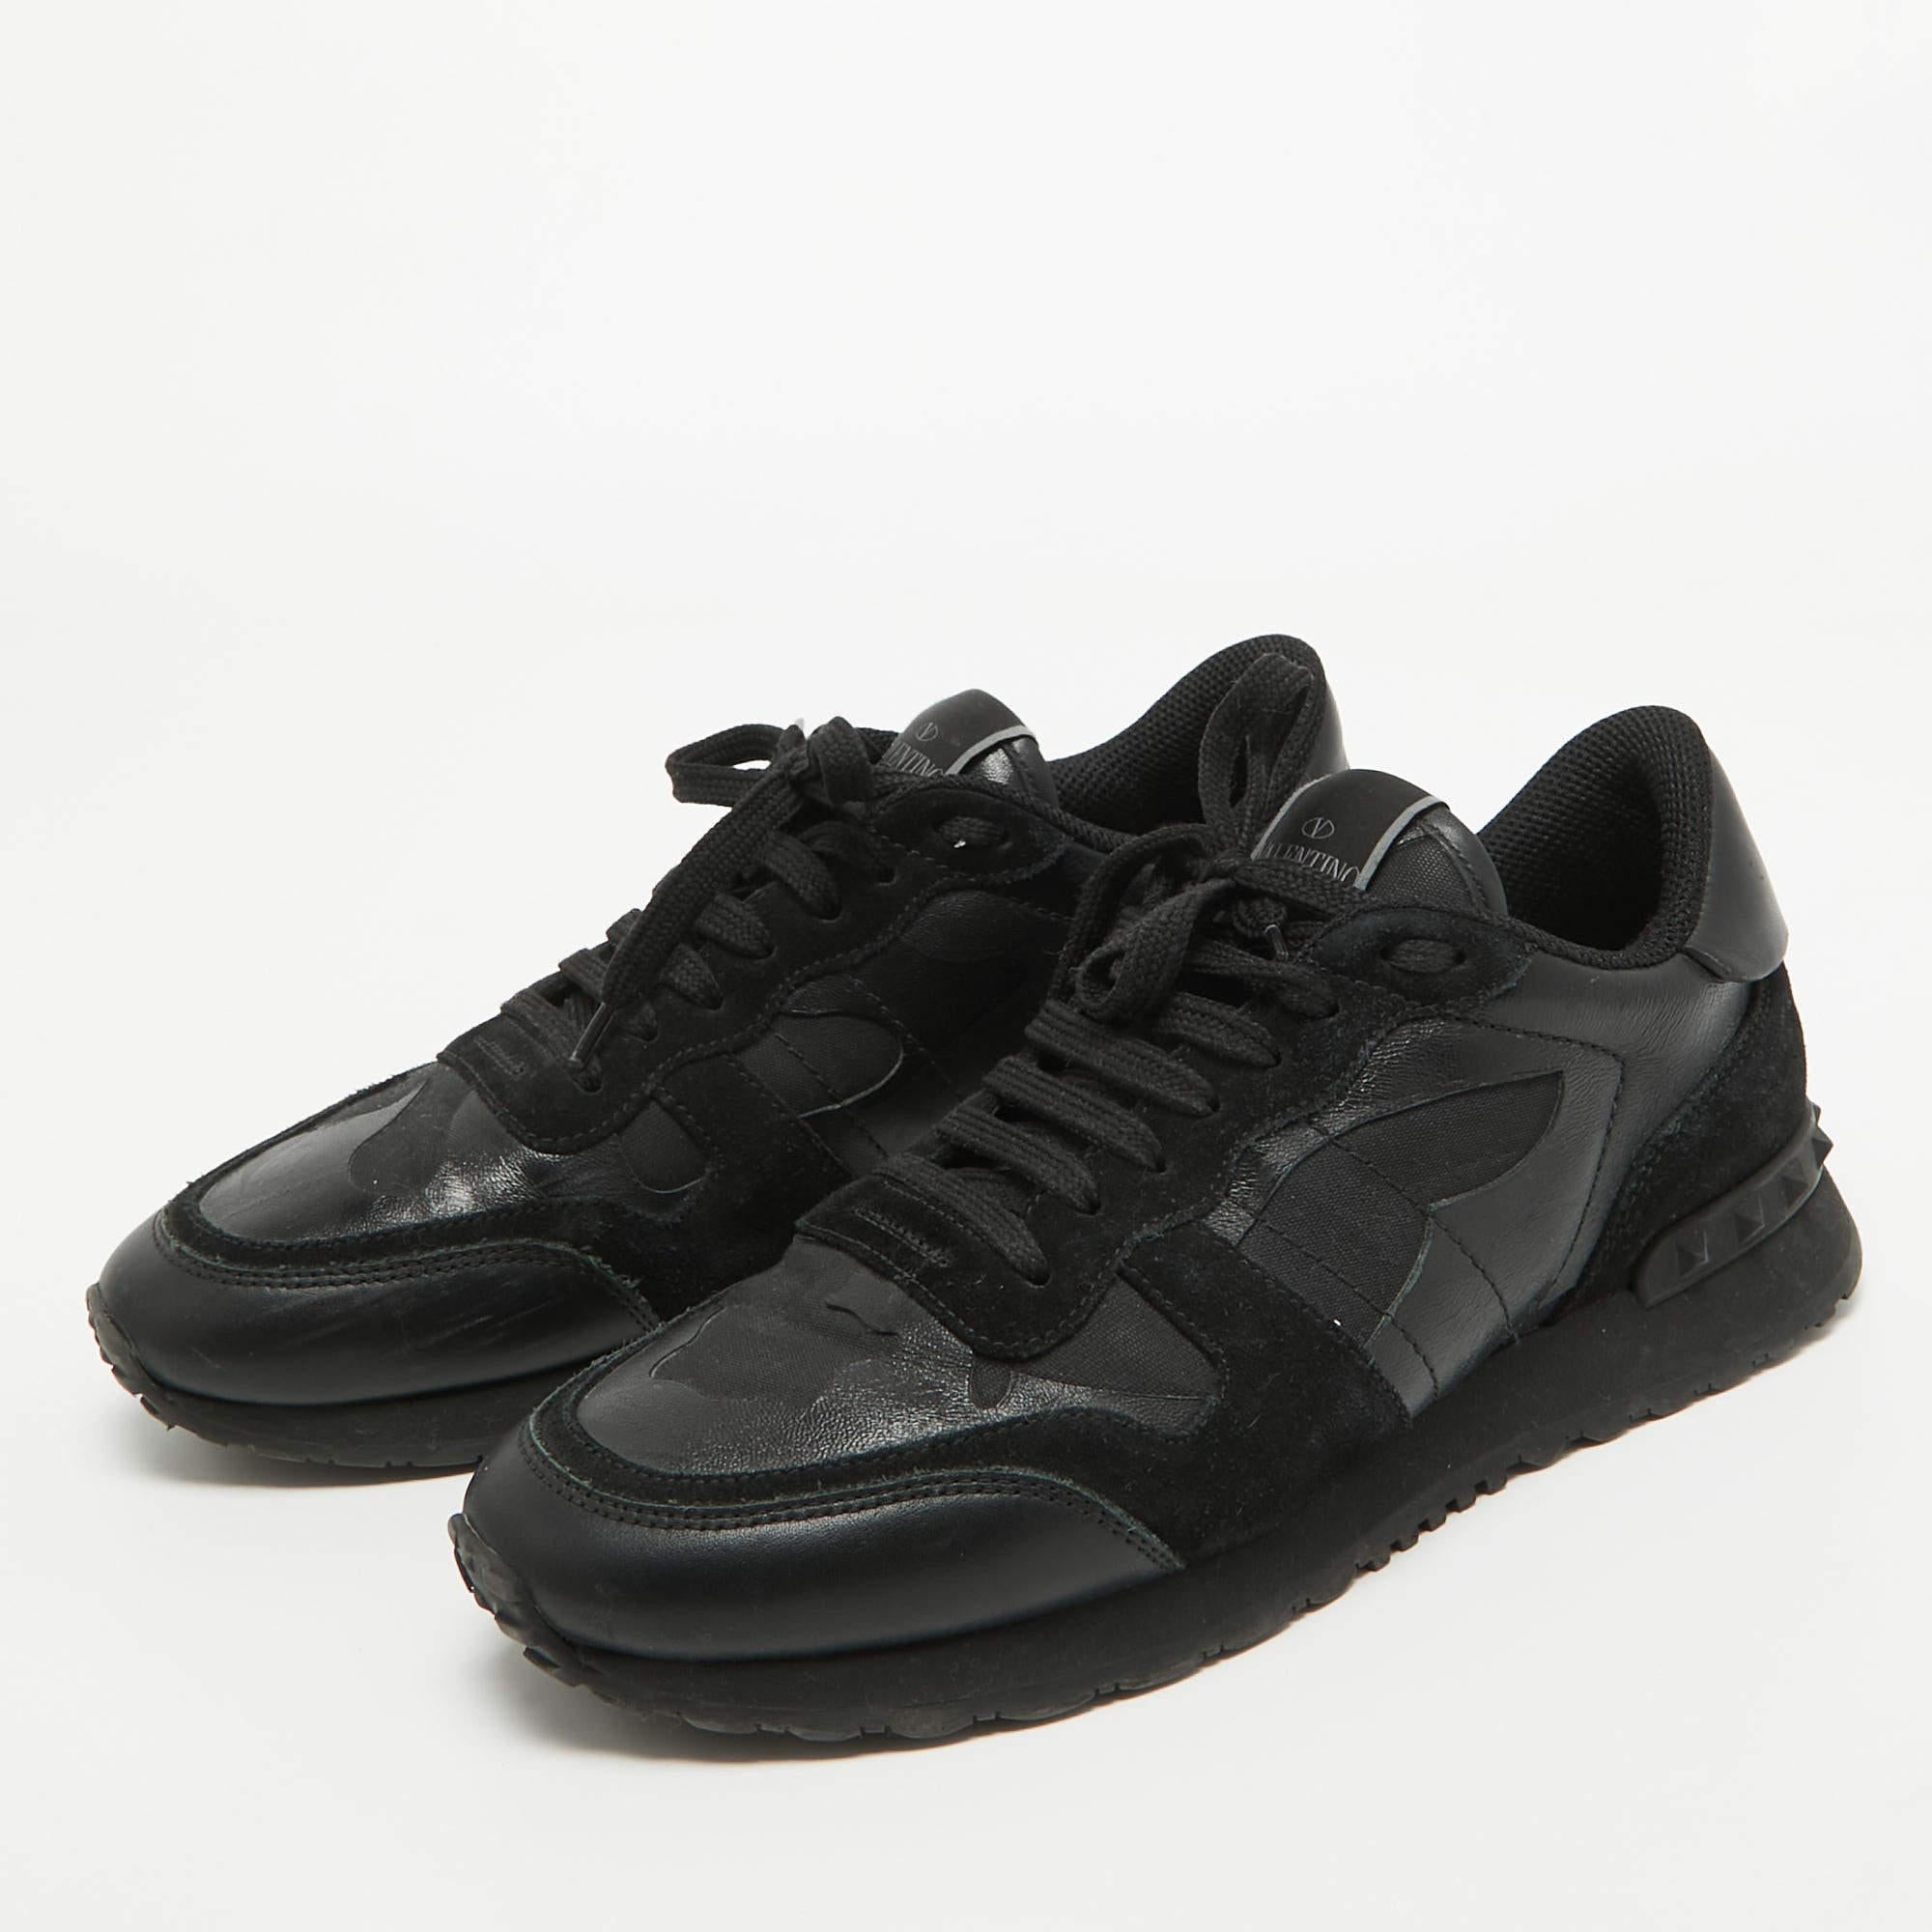 Valentino Black Leather and Suede Rockrunner Law Top Sneakers Size 40 For Sale 3